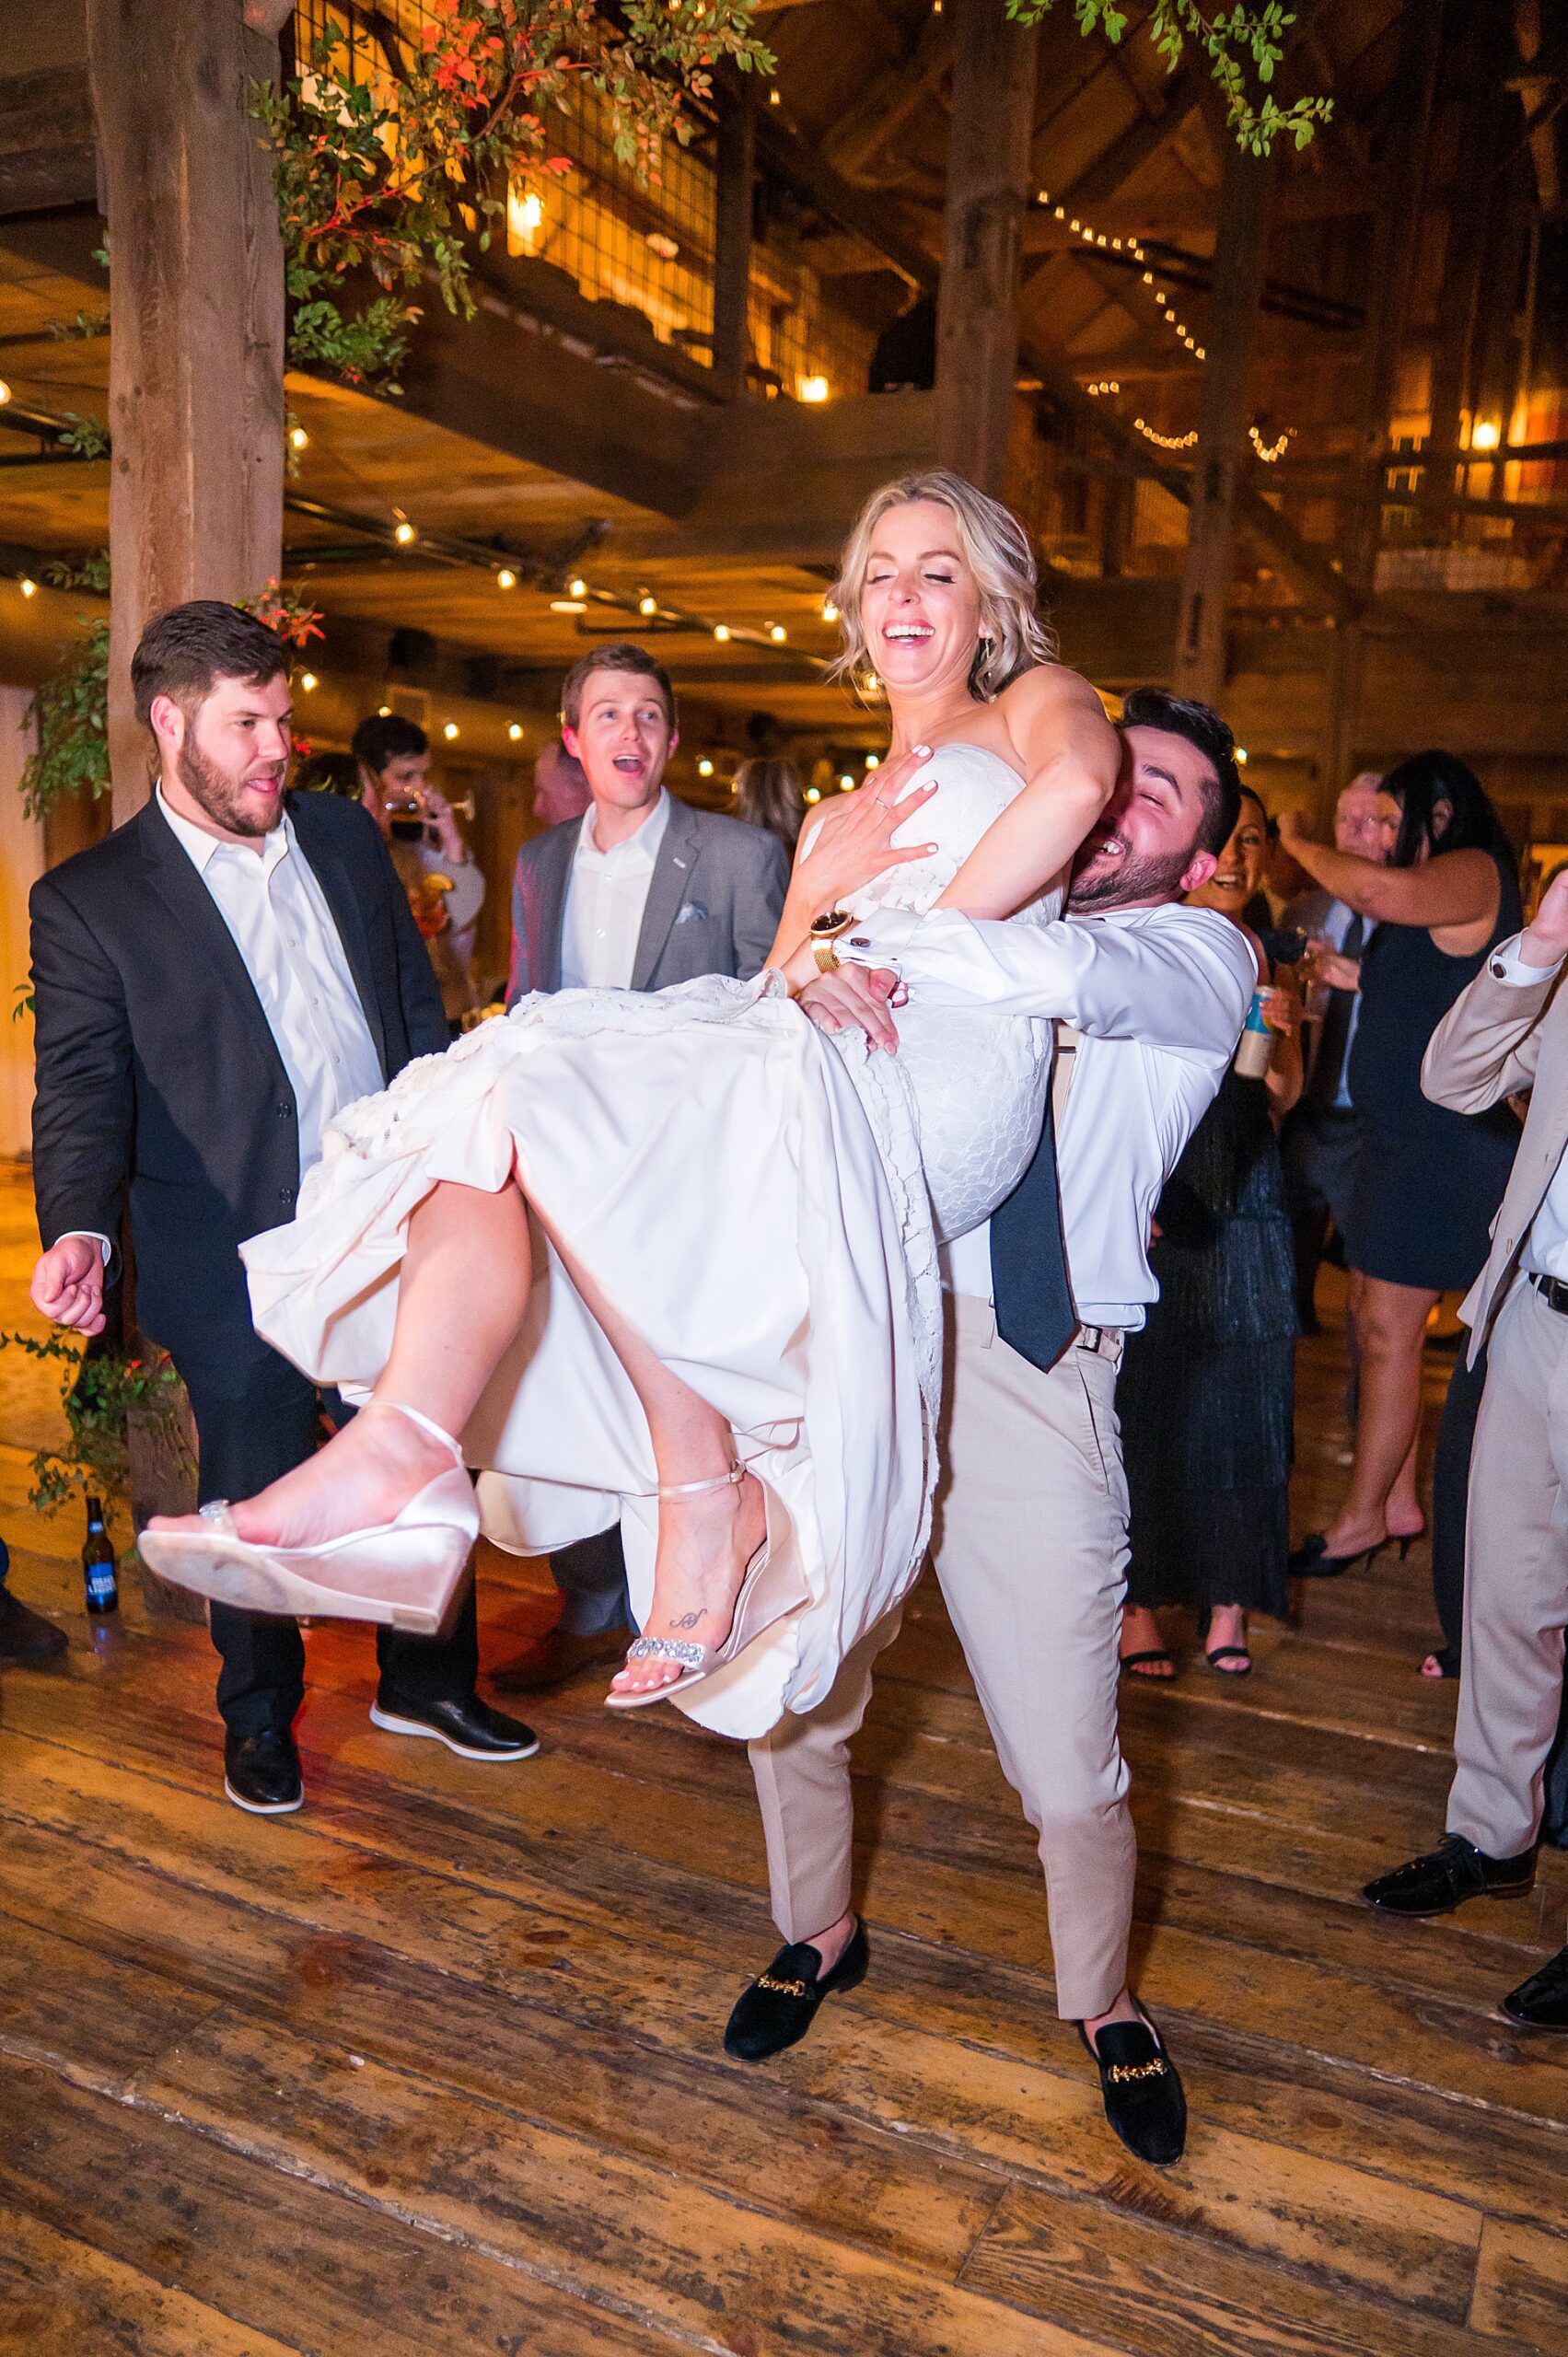 fun and candid moments from Elegant NH Winter Wedding reception